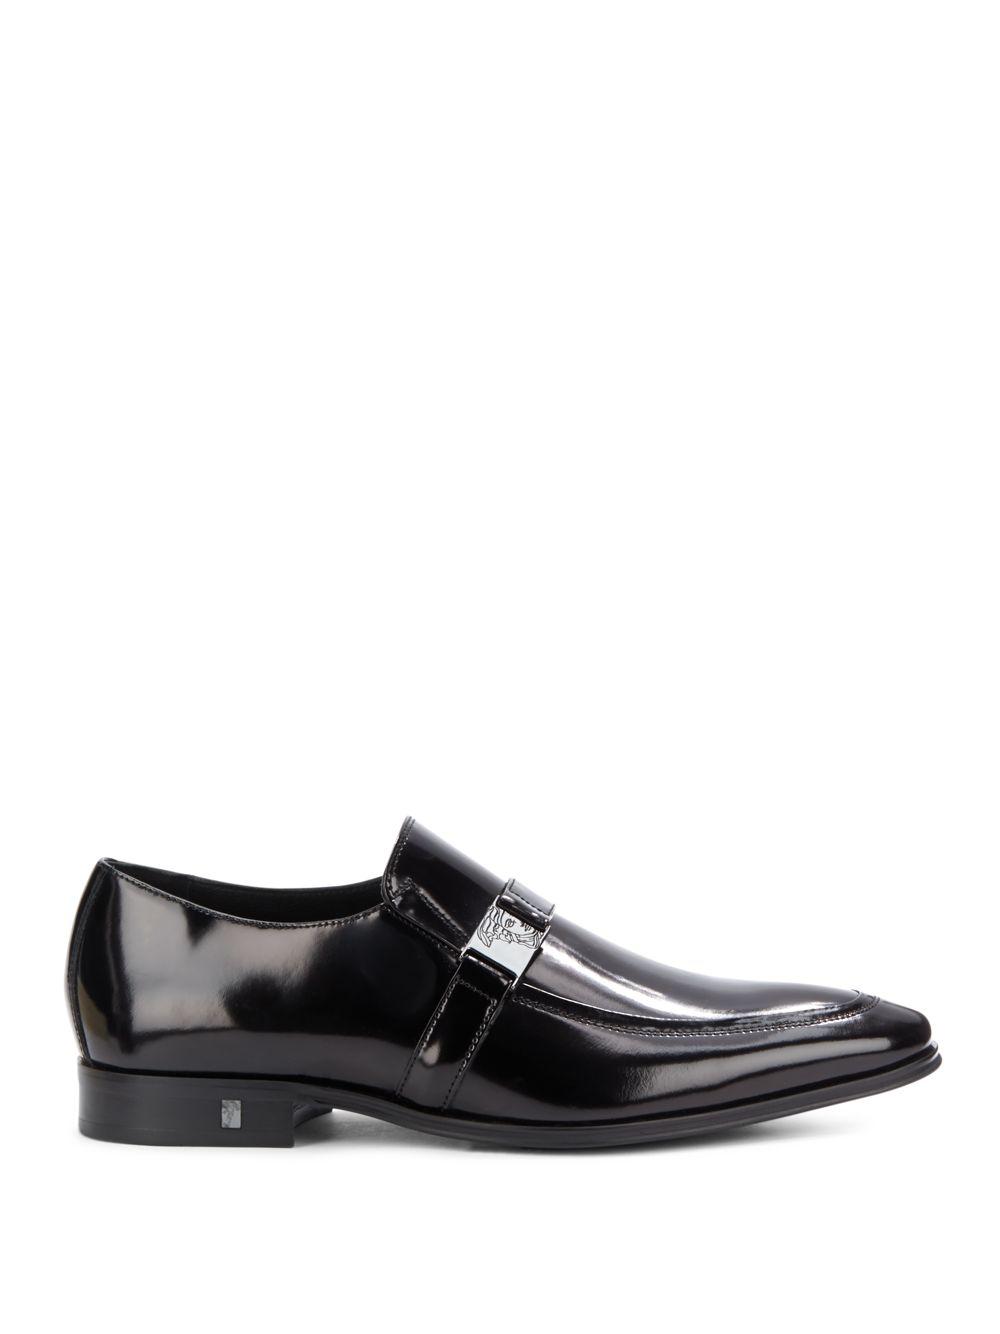 Versace Logo Buckle Leather Dress Shoes in Black for |